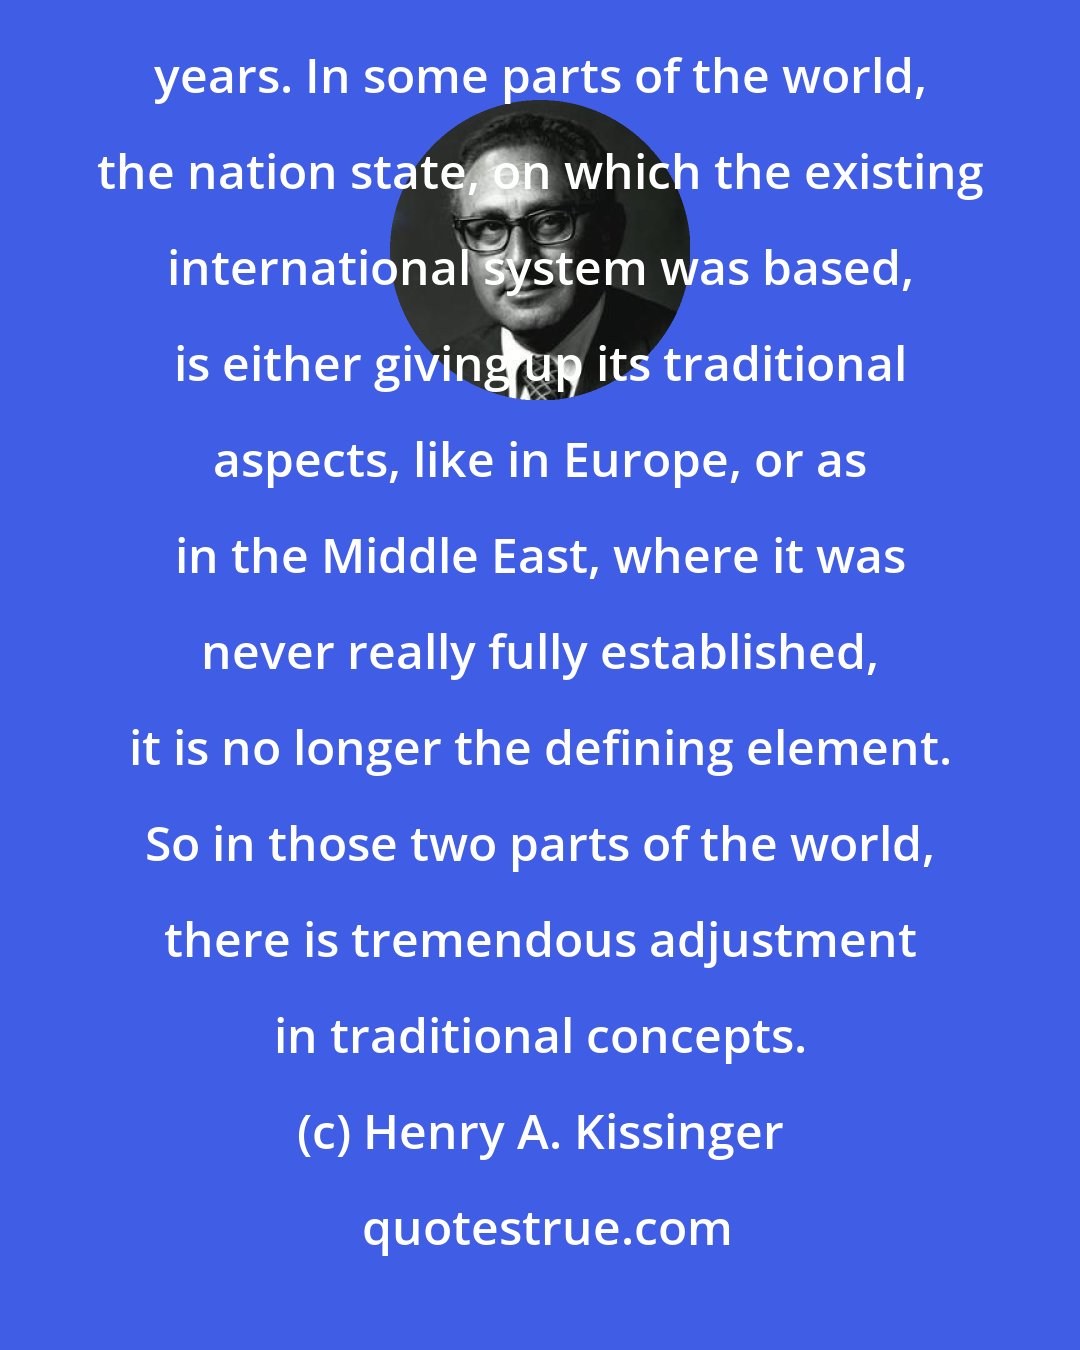 Henry A. Kissinger: We're at a moment when the international system is in a period of change like we haven't seen for several hundred years. In some parts of the world, the nation state, on which the existing international system was based, is either giving up its traditional aspects, like in Europe, or as in the Middle East, where it was never really fully established, it is no longer the defining element. So in those two parts of the world, there is tremendous adjustment in traditional concepts.